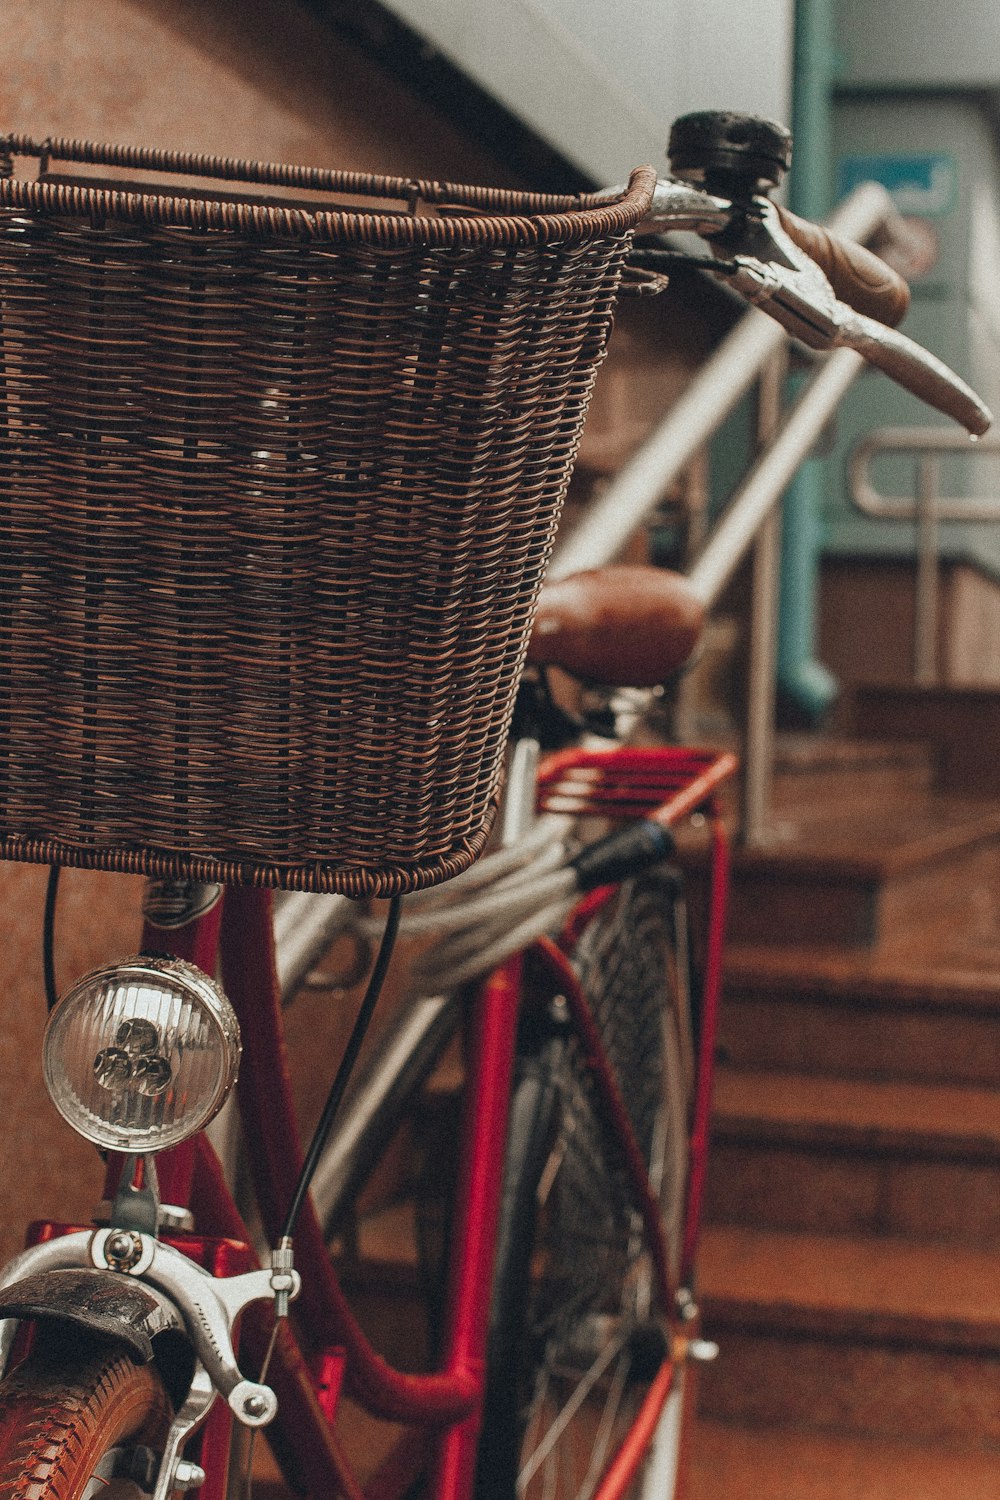 red and brown bicycle beside wall